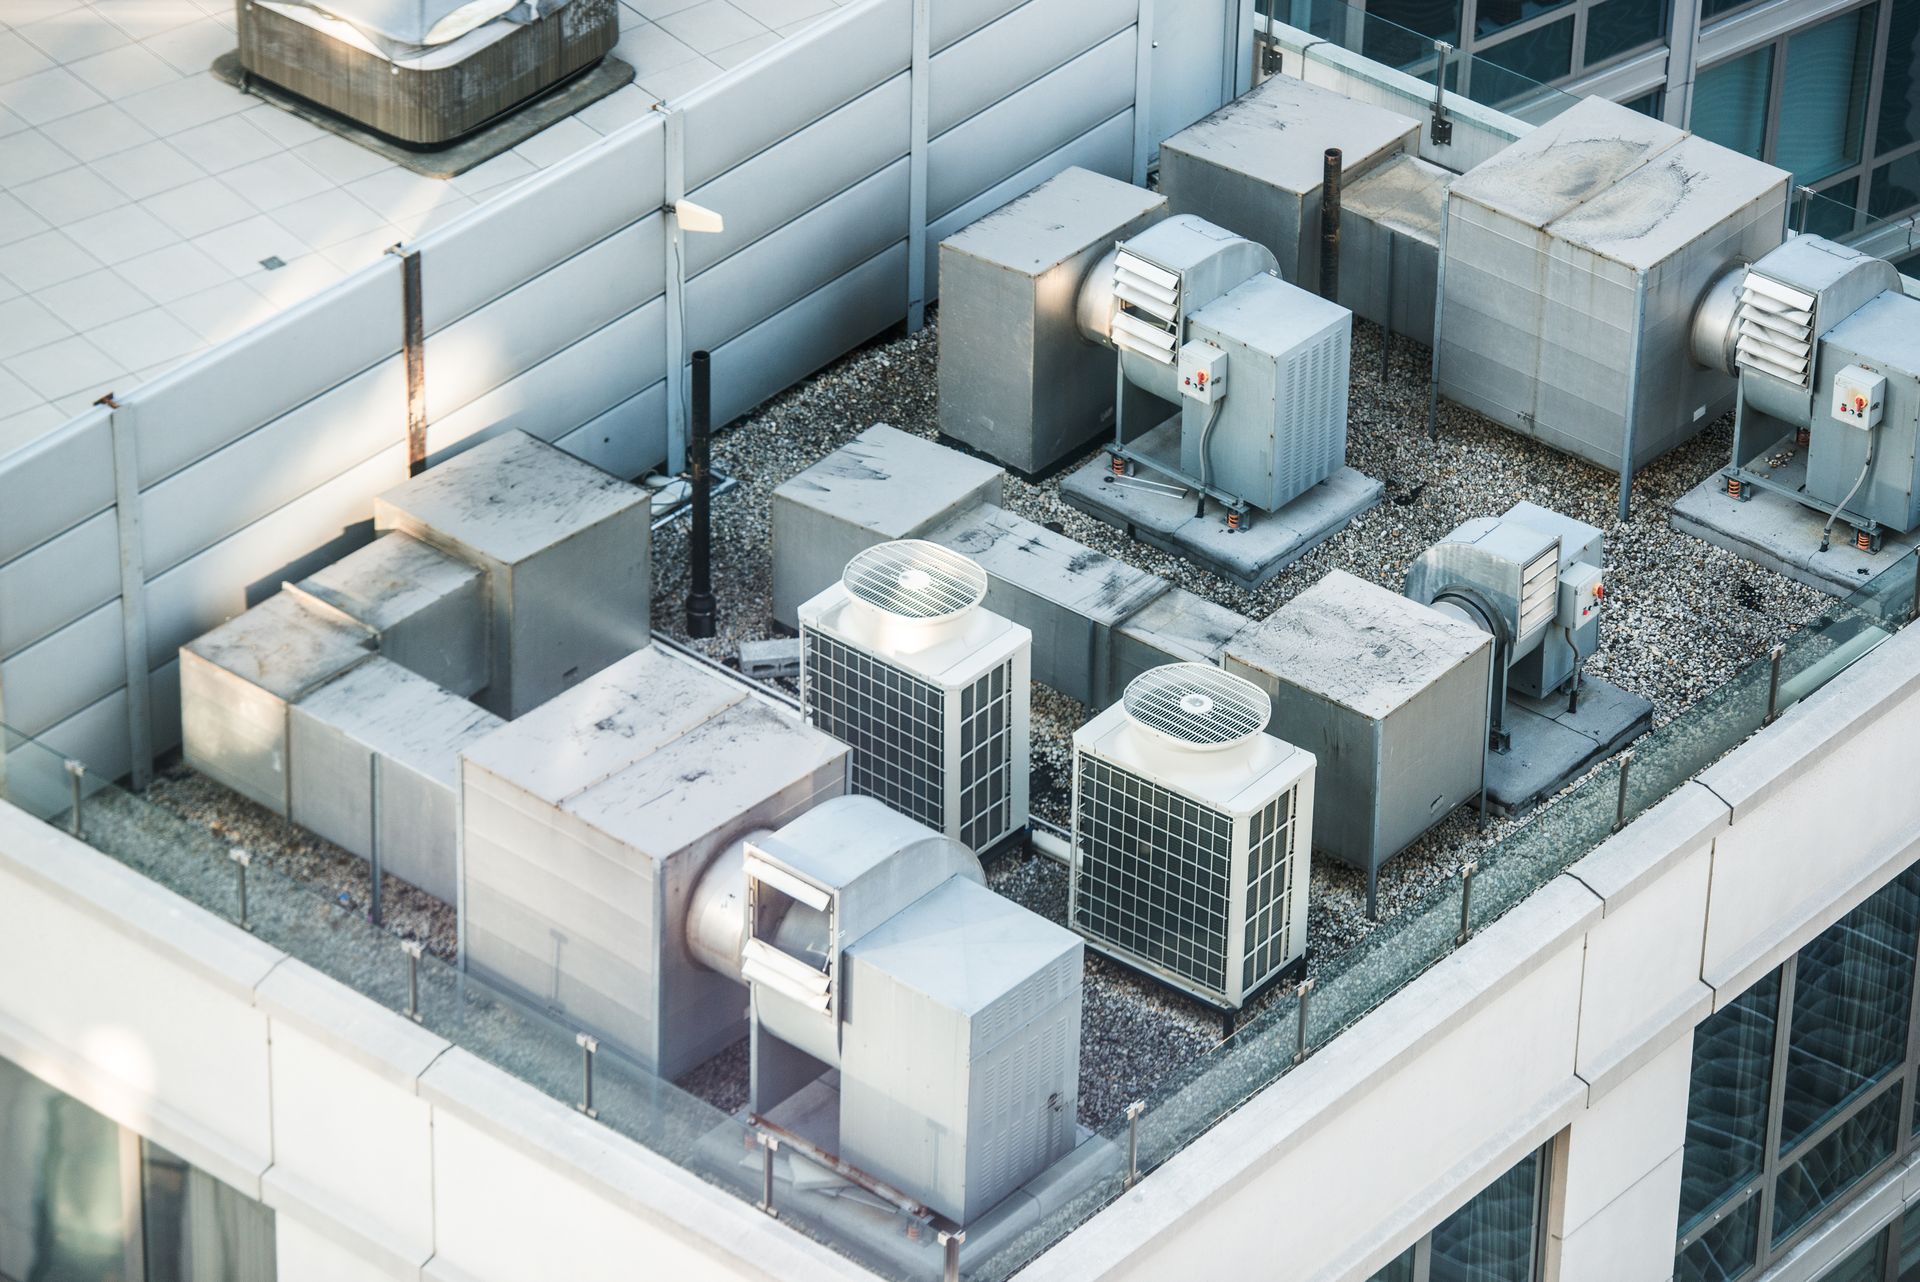 An aerial view of a building with a lot of air conditioning equipment on the roof.